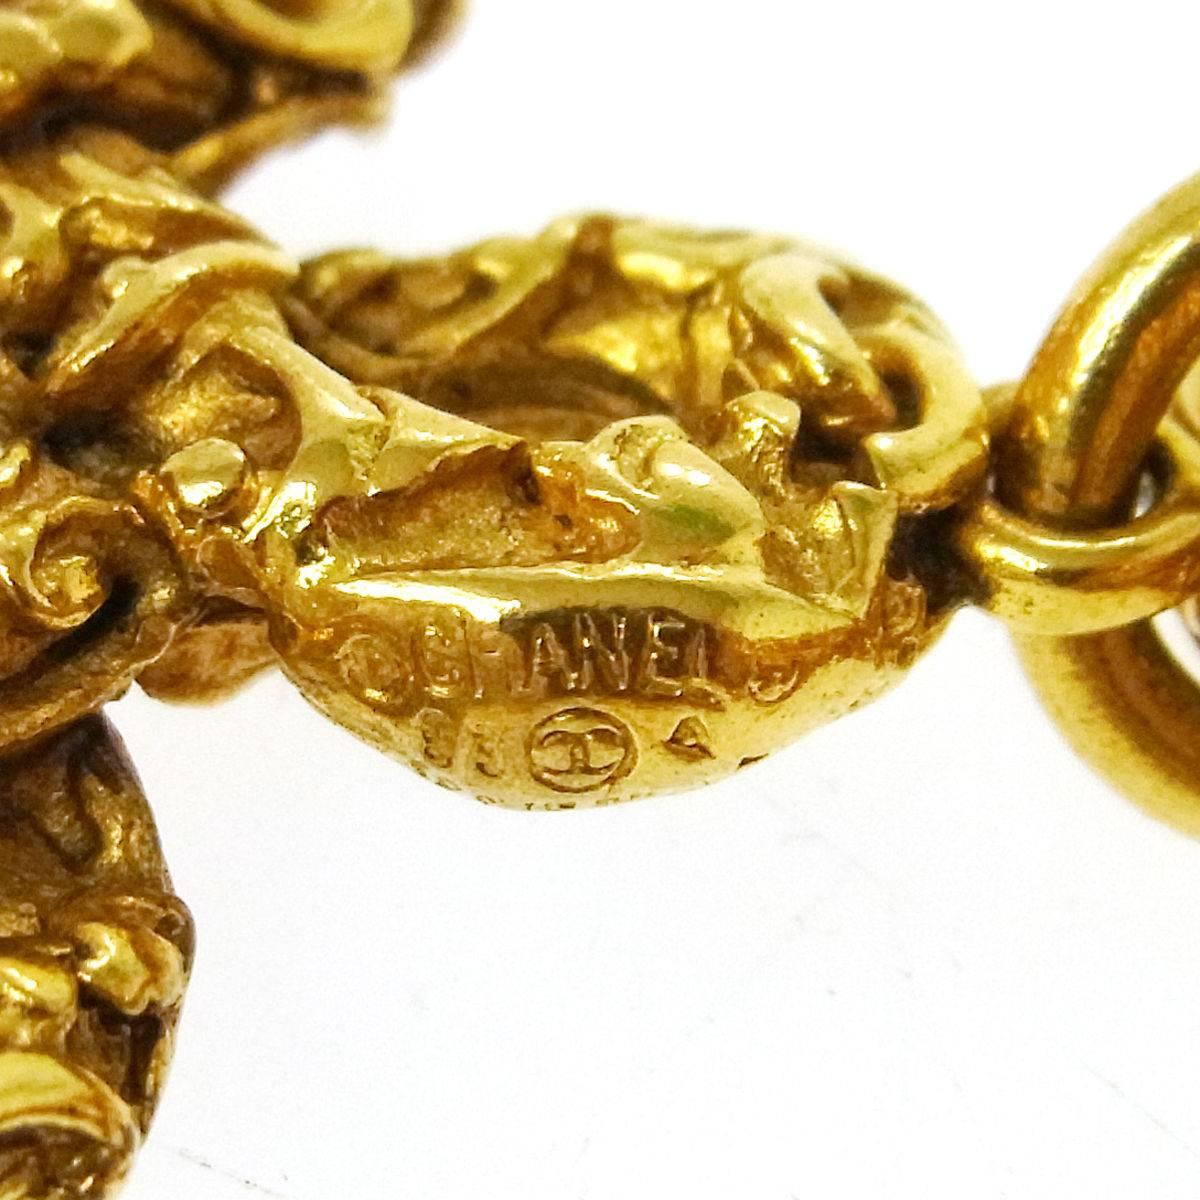 Chanel Vintage Gold Textured Charm Link Bracelet

Metal
Gold tone
Lobster claw closure
Made in France
Charm diameter 1